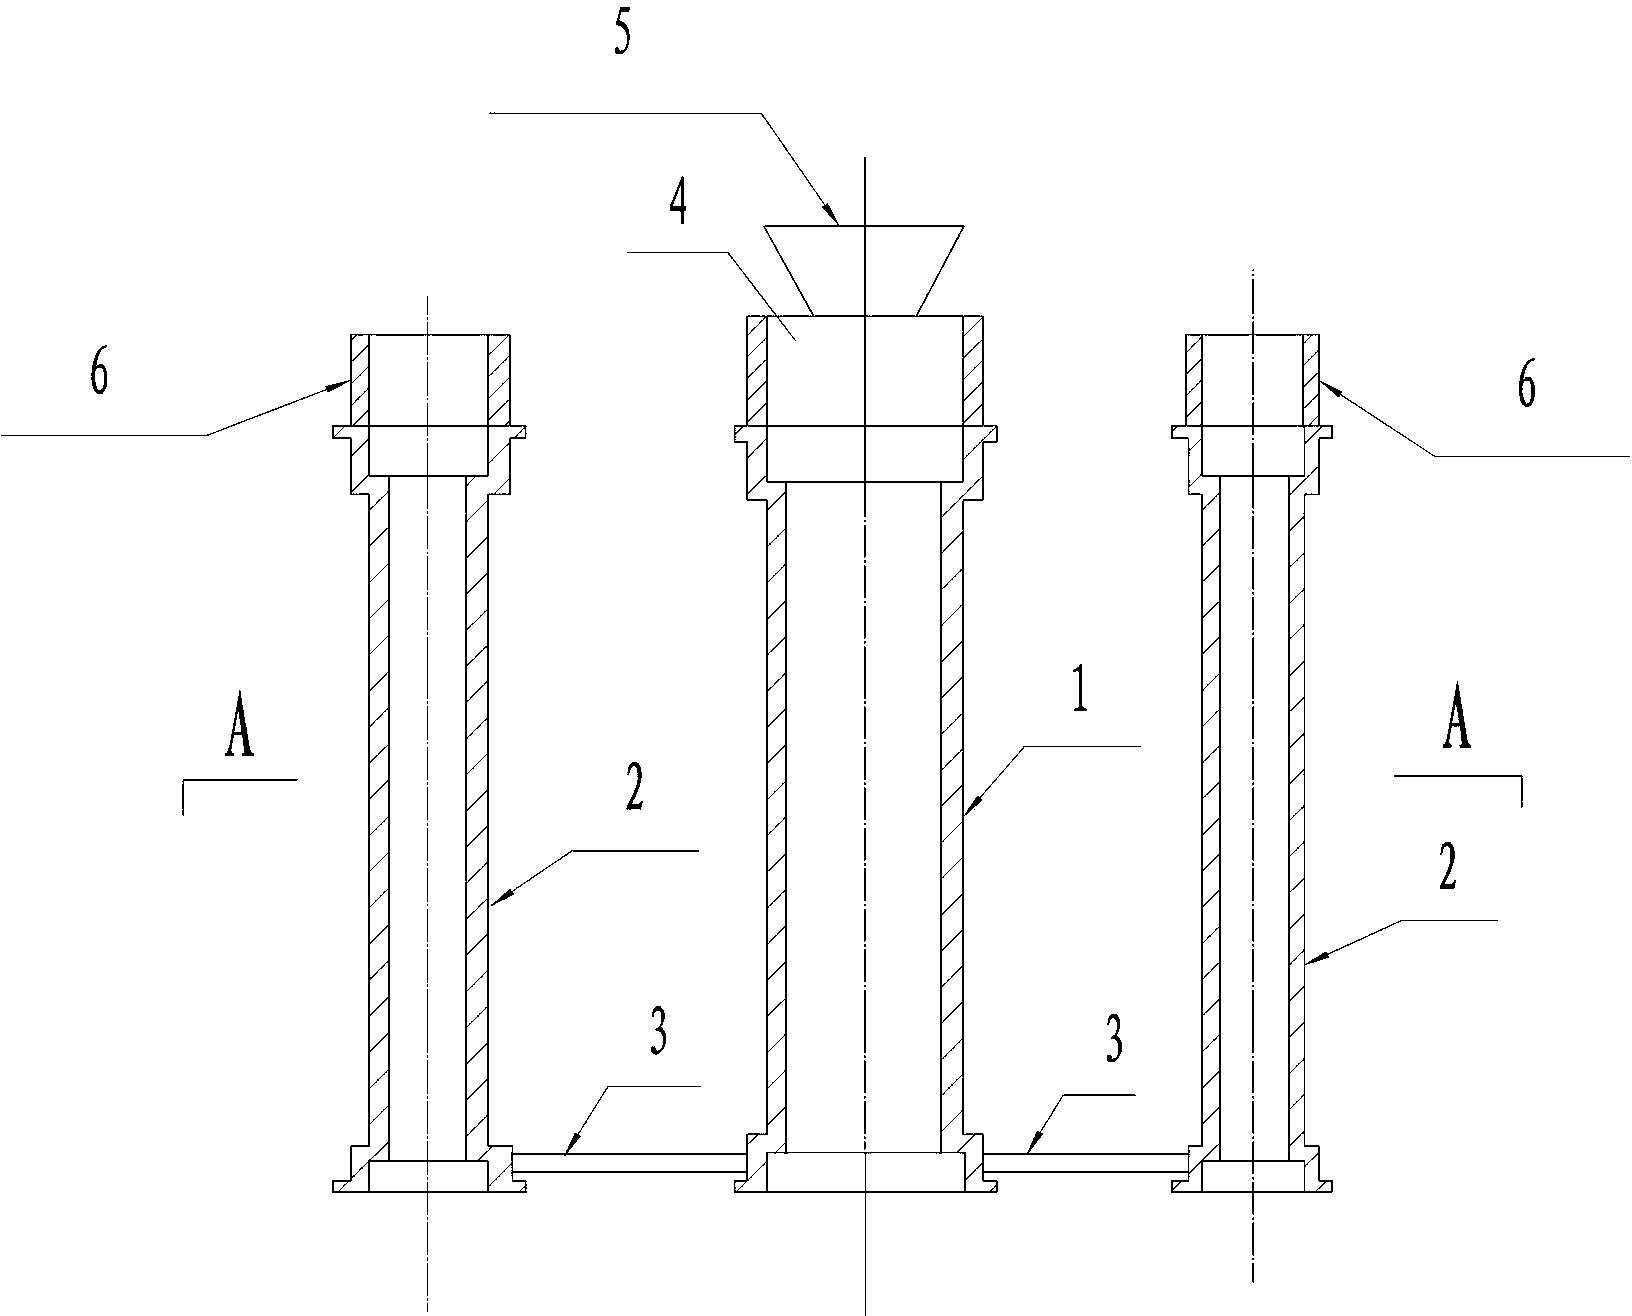 Combined model structure for improving product yield of evaporative pattern casting process for cast iron pipe fittings